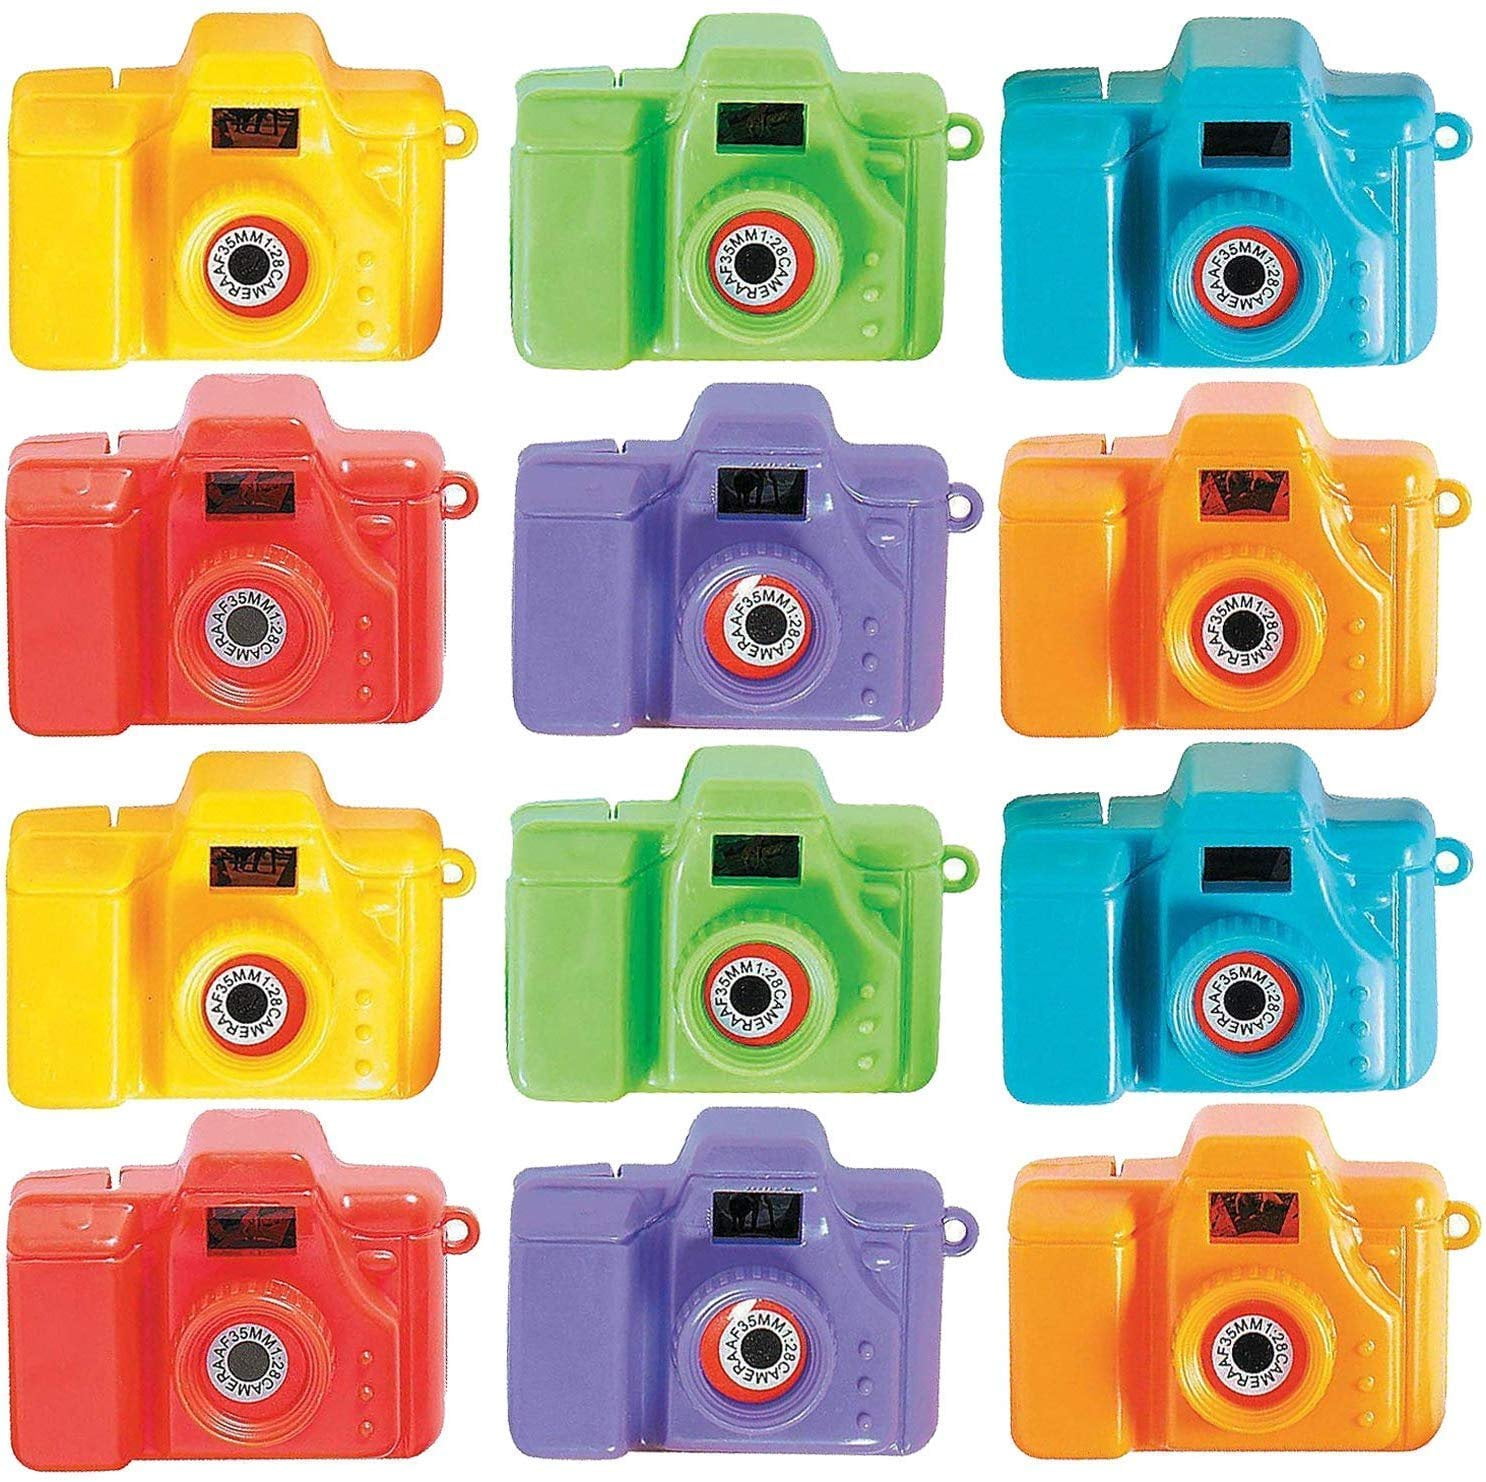 Plastic Toy Camera Educational Toys For Kids Birthday Party 8 Animal Pictures 